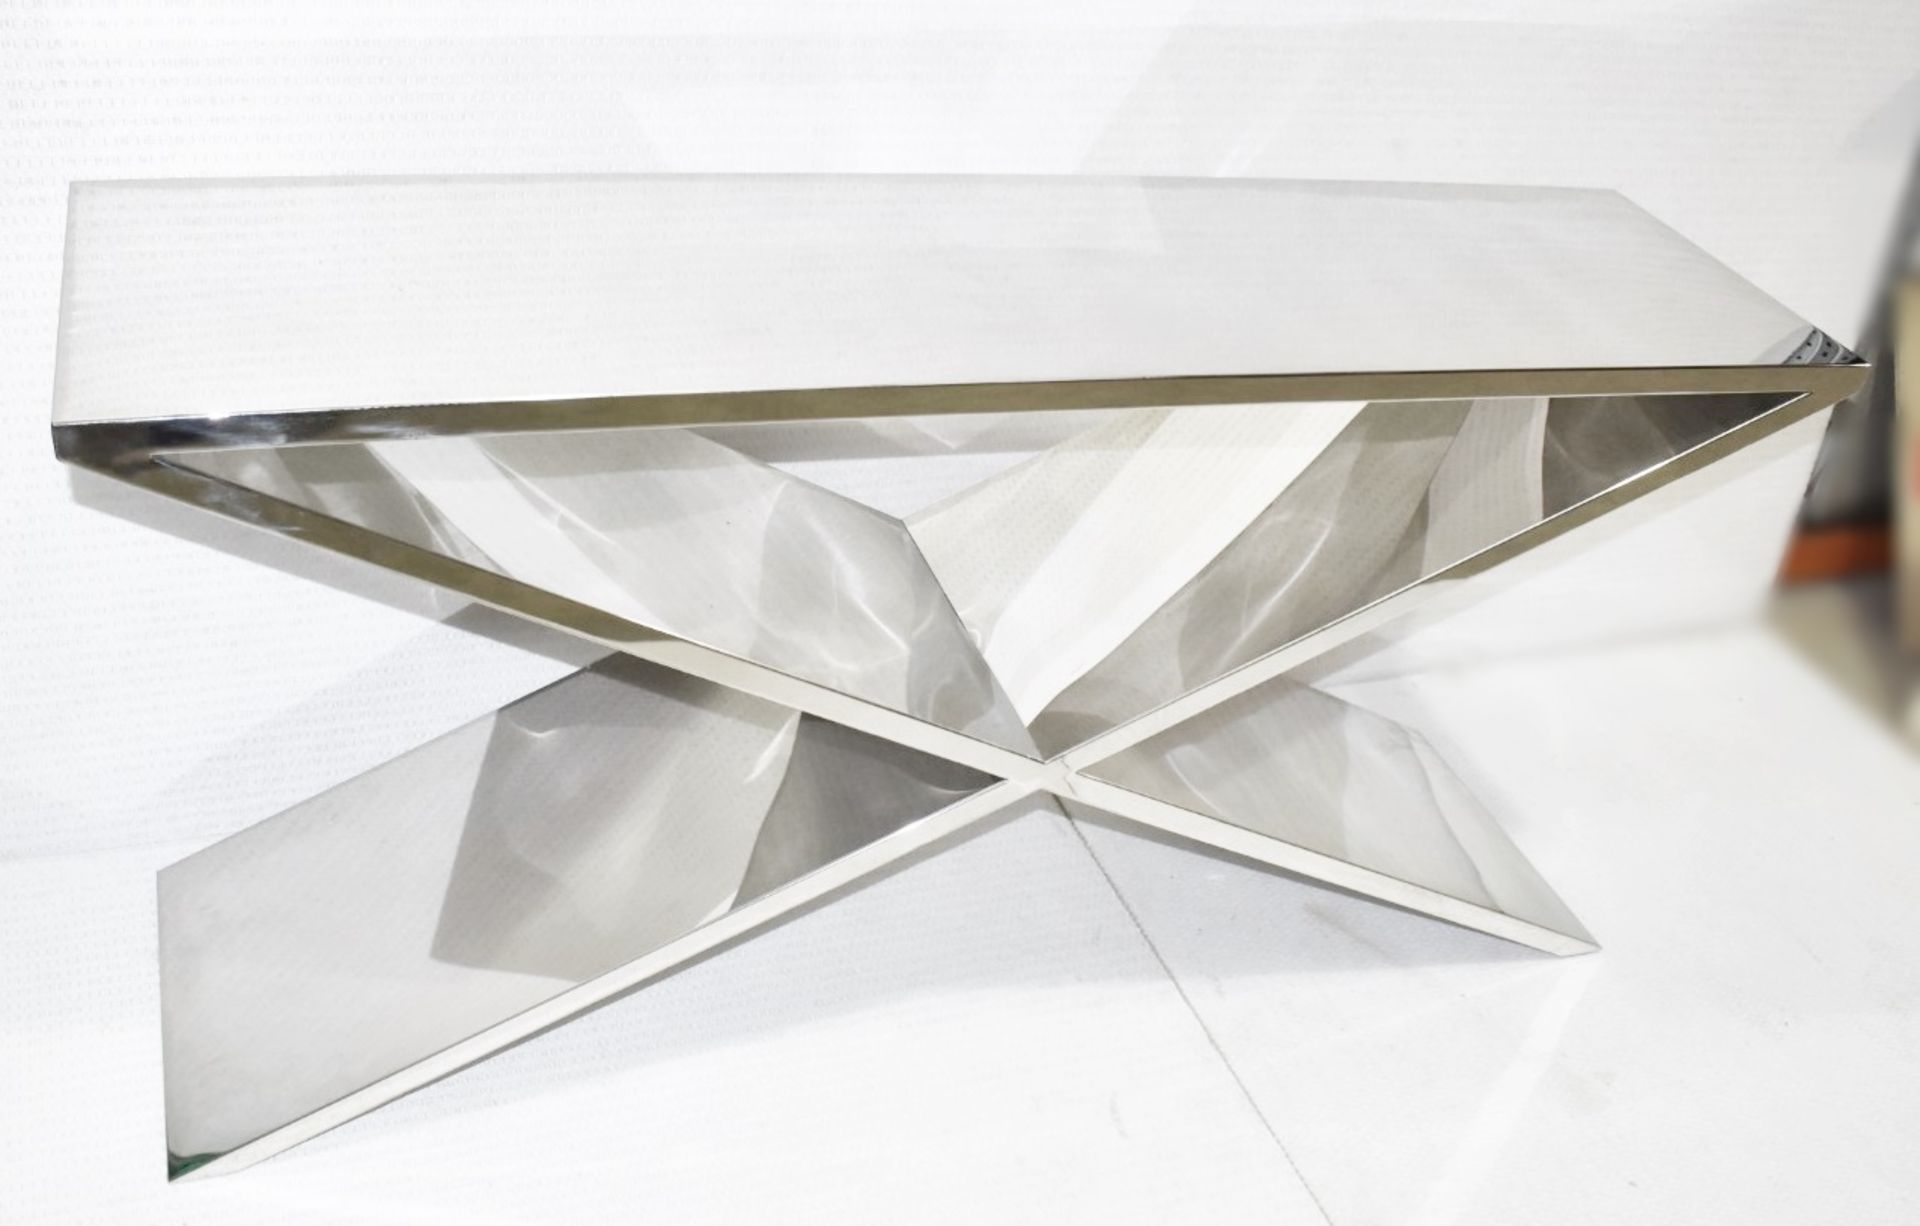 1 x EICHHOLTZ 'Metropole' Luxury Handcrafted Mirrored Console Table - Original Price £2,810 - Image 3 of 10